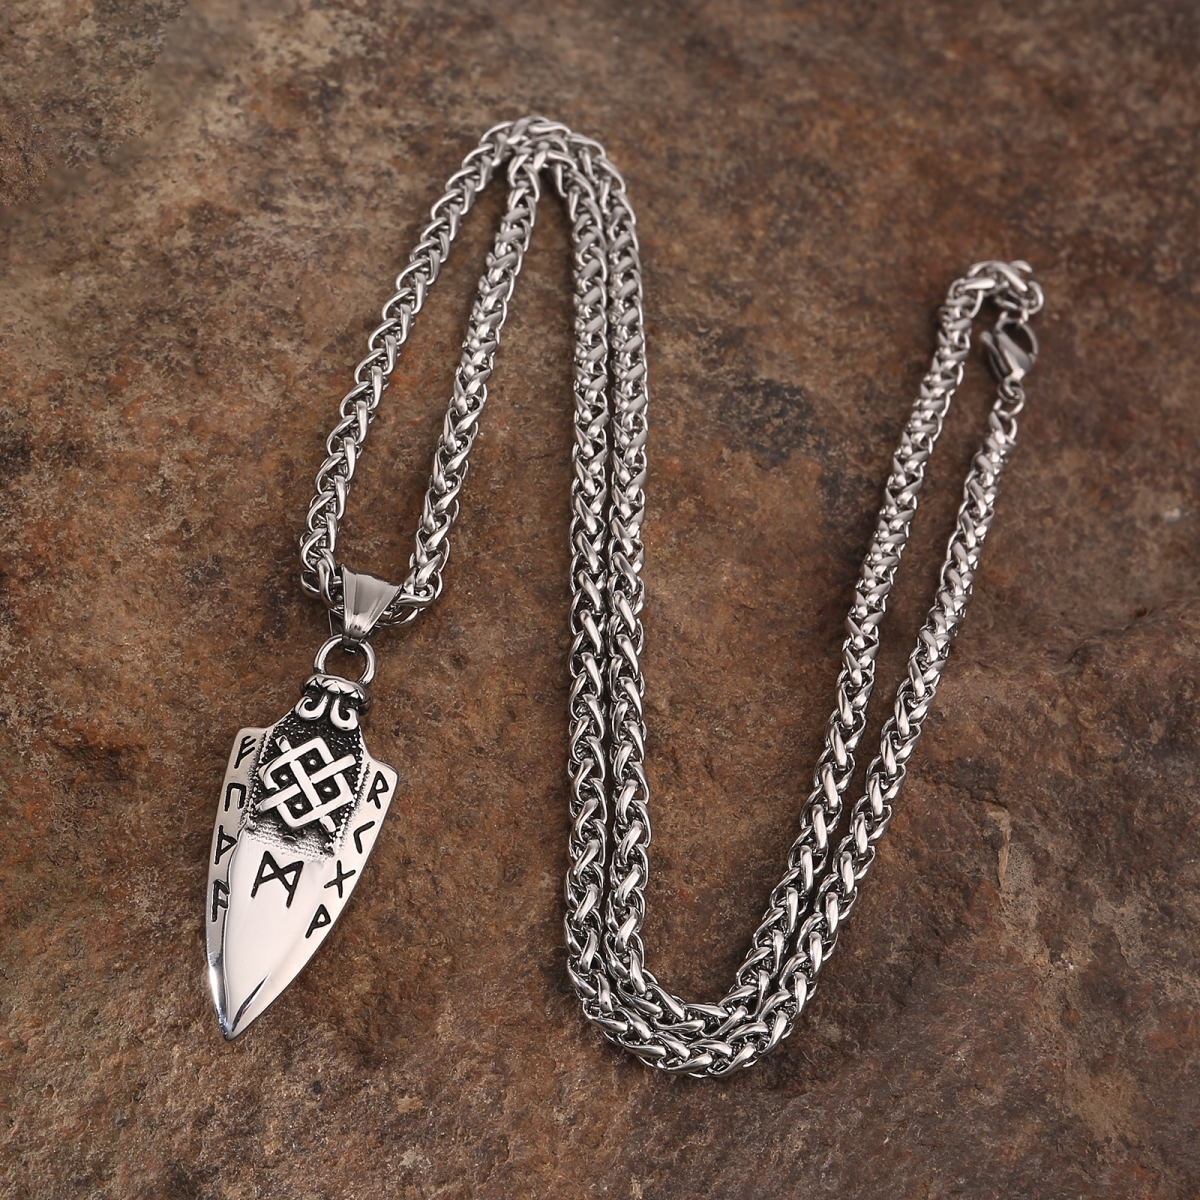 Arrowhead Necklace US$3.2/PC-NORSECOLLECTION- Viking Jewelry,Viking Necklace,Viking Bracelet,Viking Rings,Viking Mugs,Viking Accessories,Viking Crafts